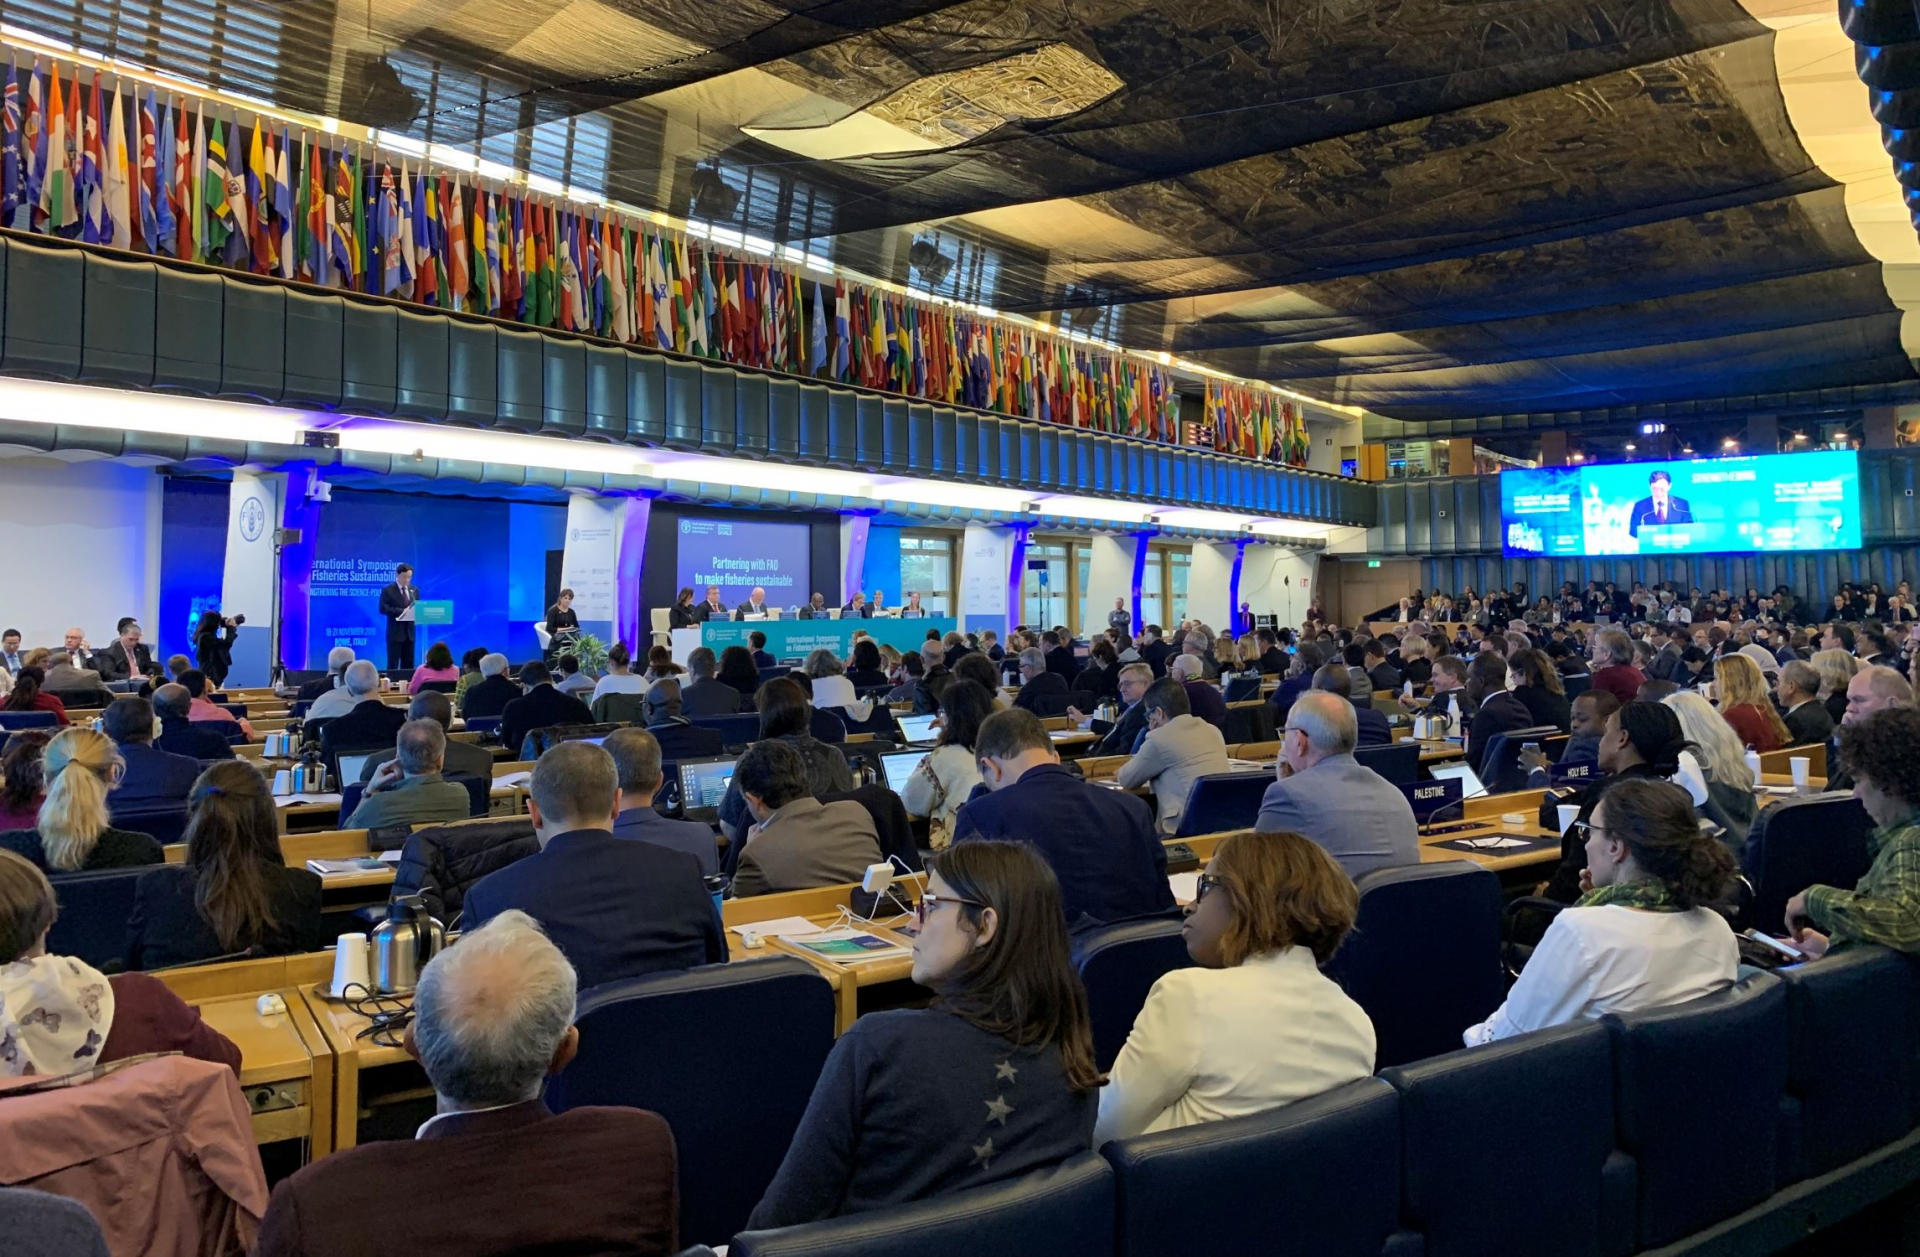 FAO International Fisheries Symposium, supported by OPRI, seeks to bridge gaps between scientists and policymakers